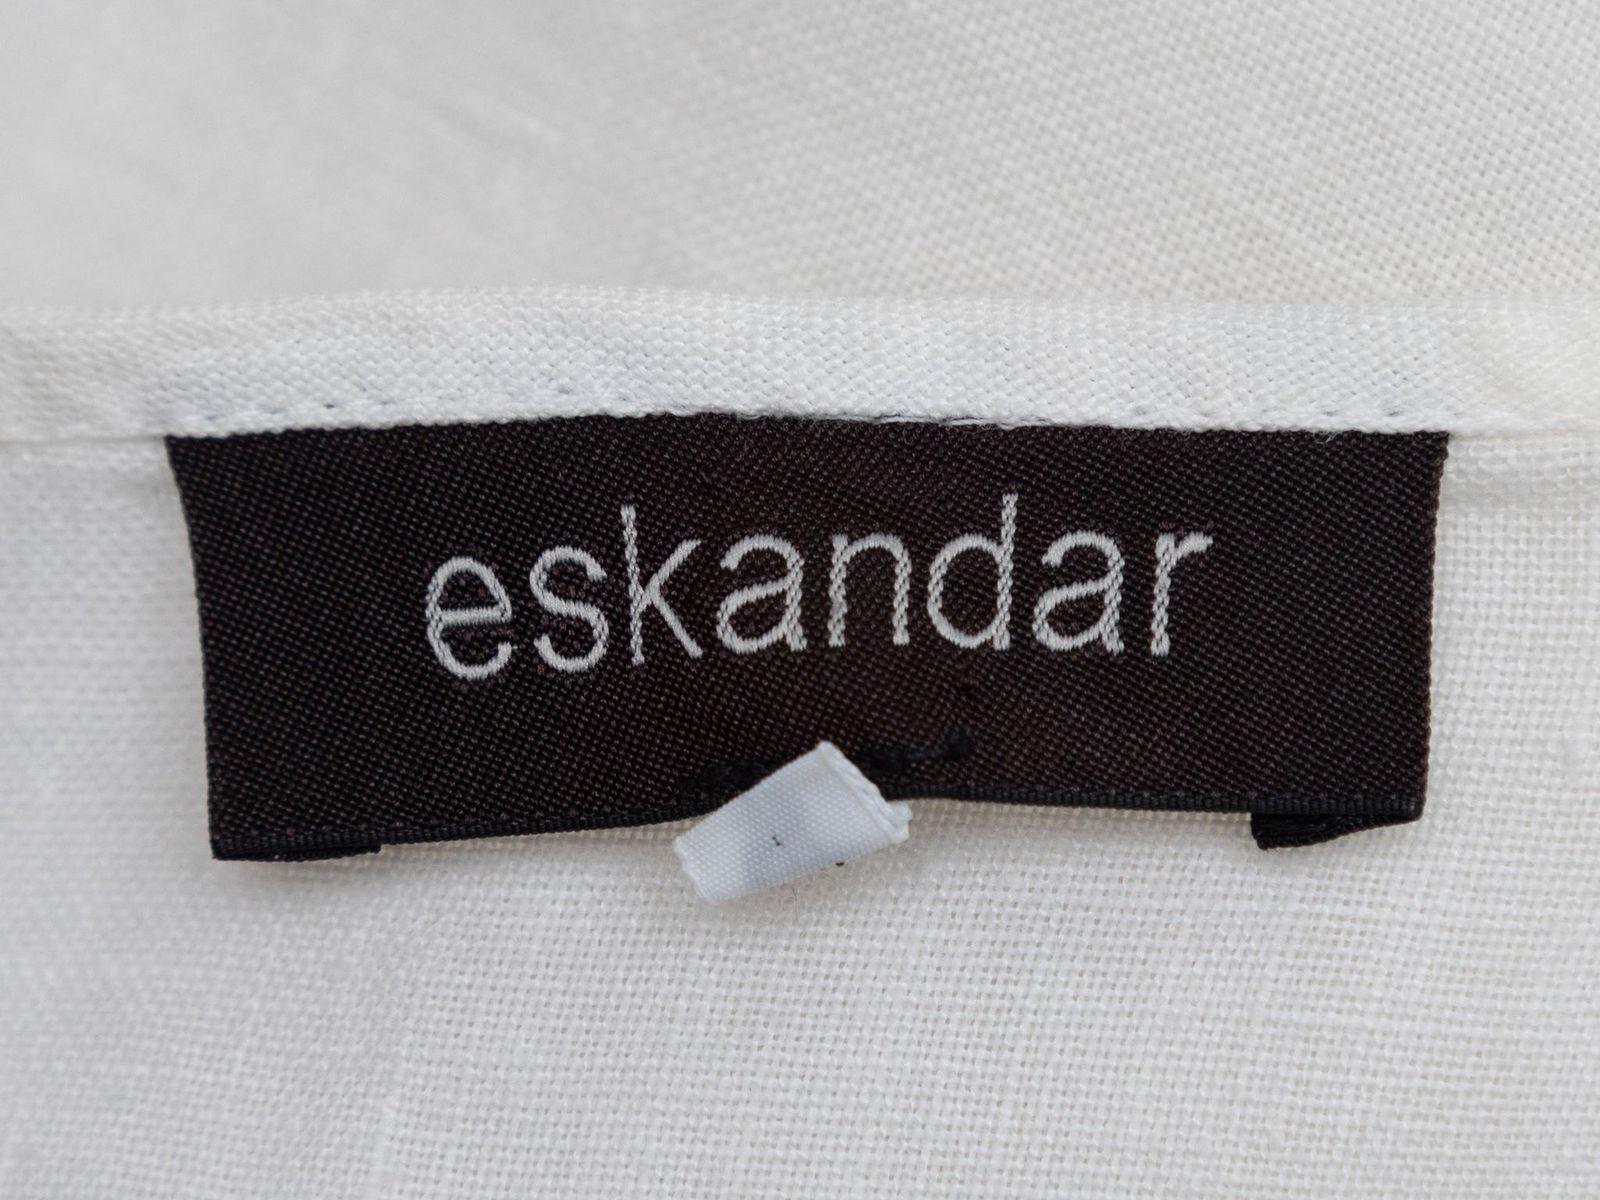 Product Details: White linen oversized button-up top by Eskandar. Crew neck. Long sleeves. Button closures at center front. 56